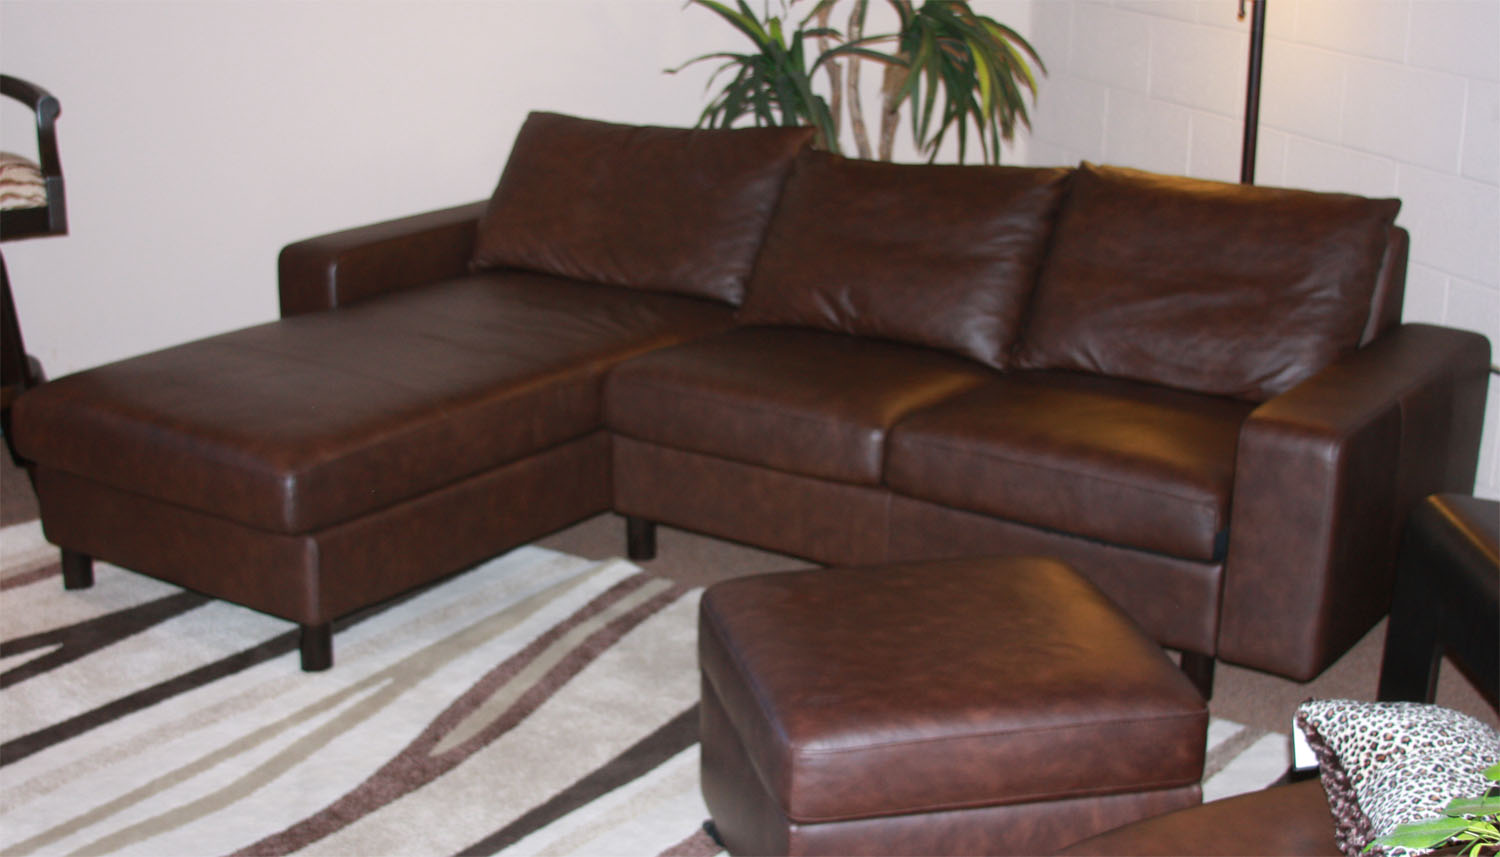 Stressless Paloma Chocolate Leather Color Sofa from Ekornes